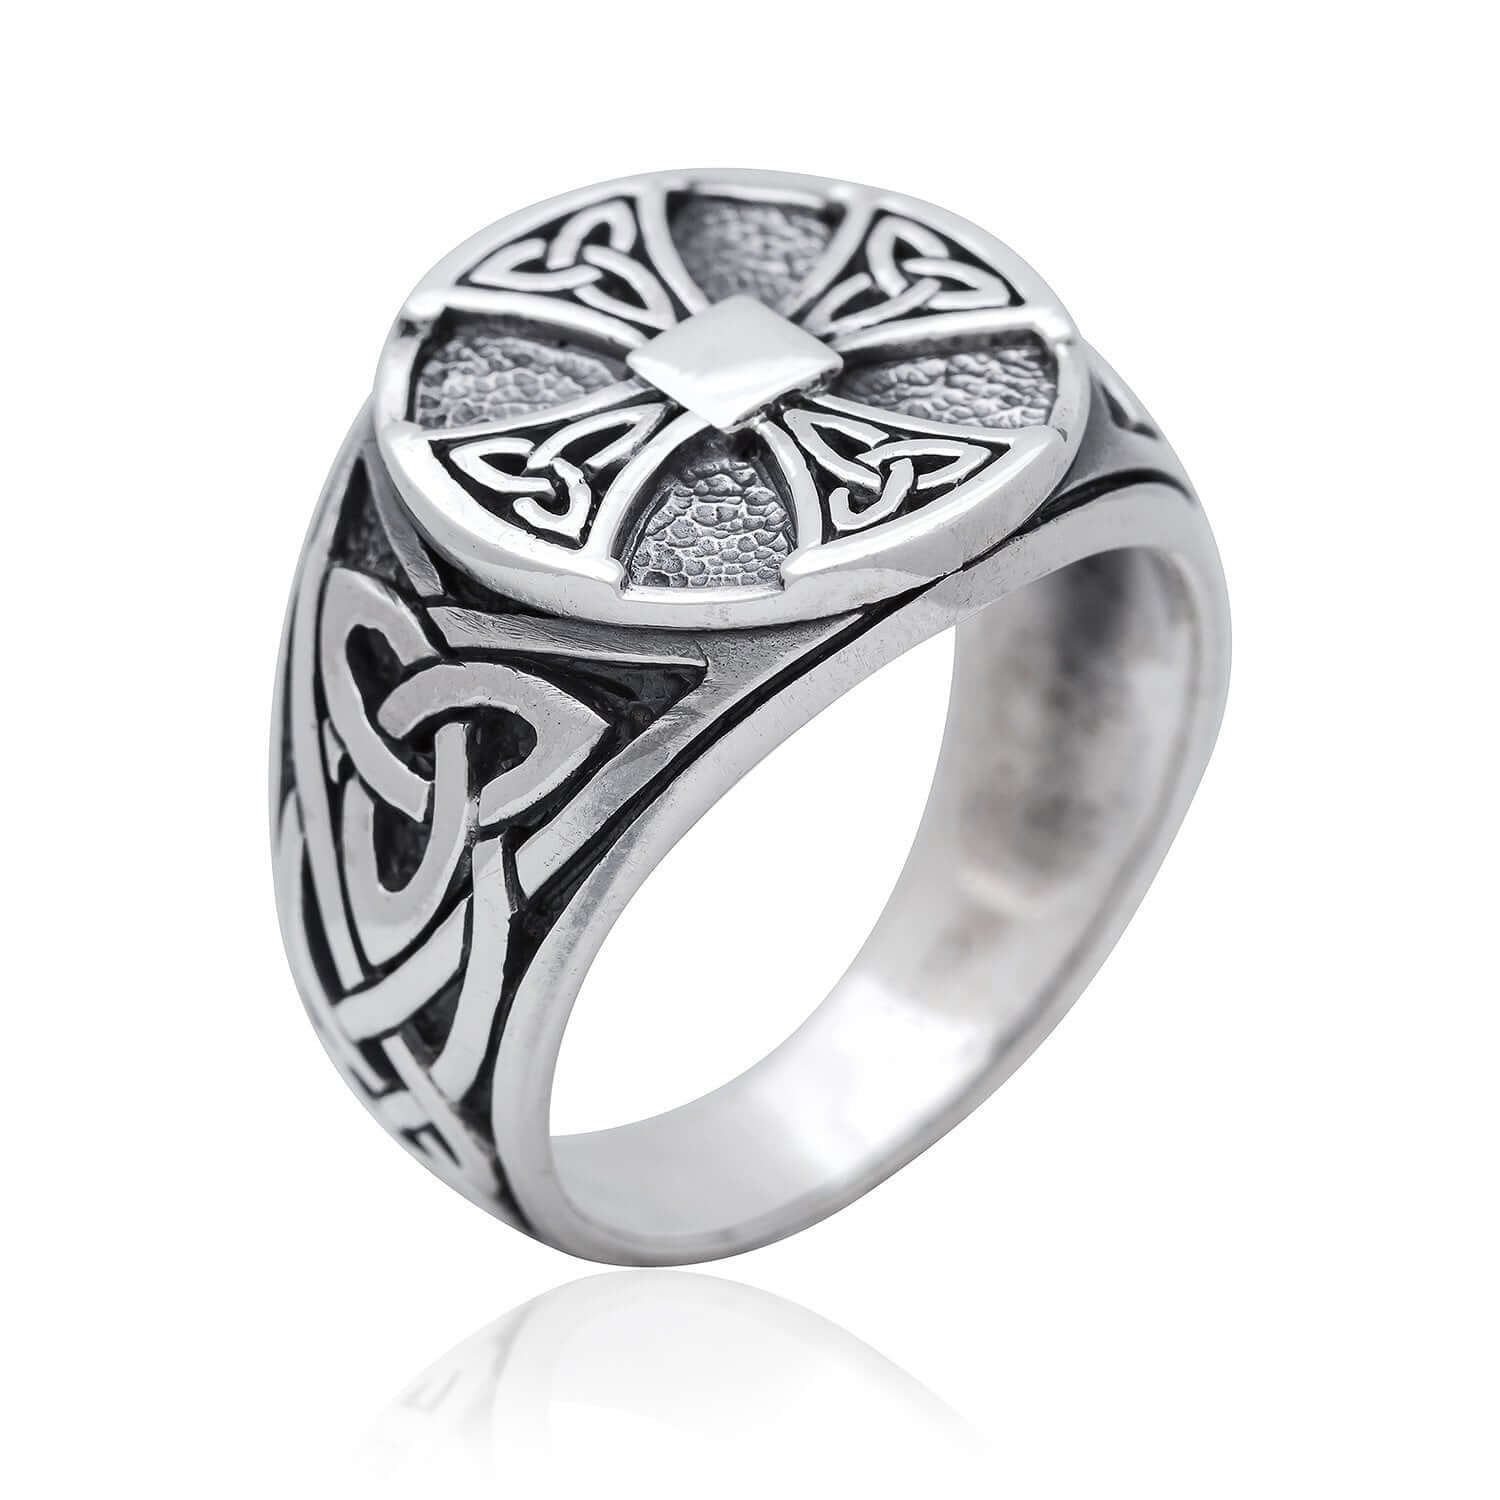 925 Sterling Silver Celtic Knot Knights Templar Iron Cross Triquetra ...